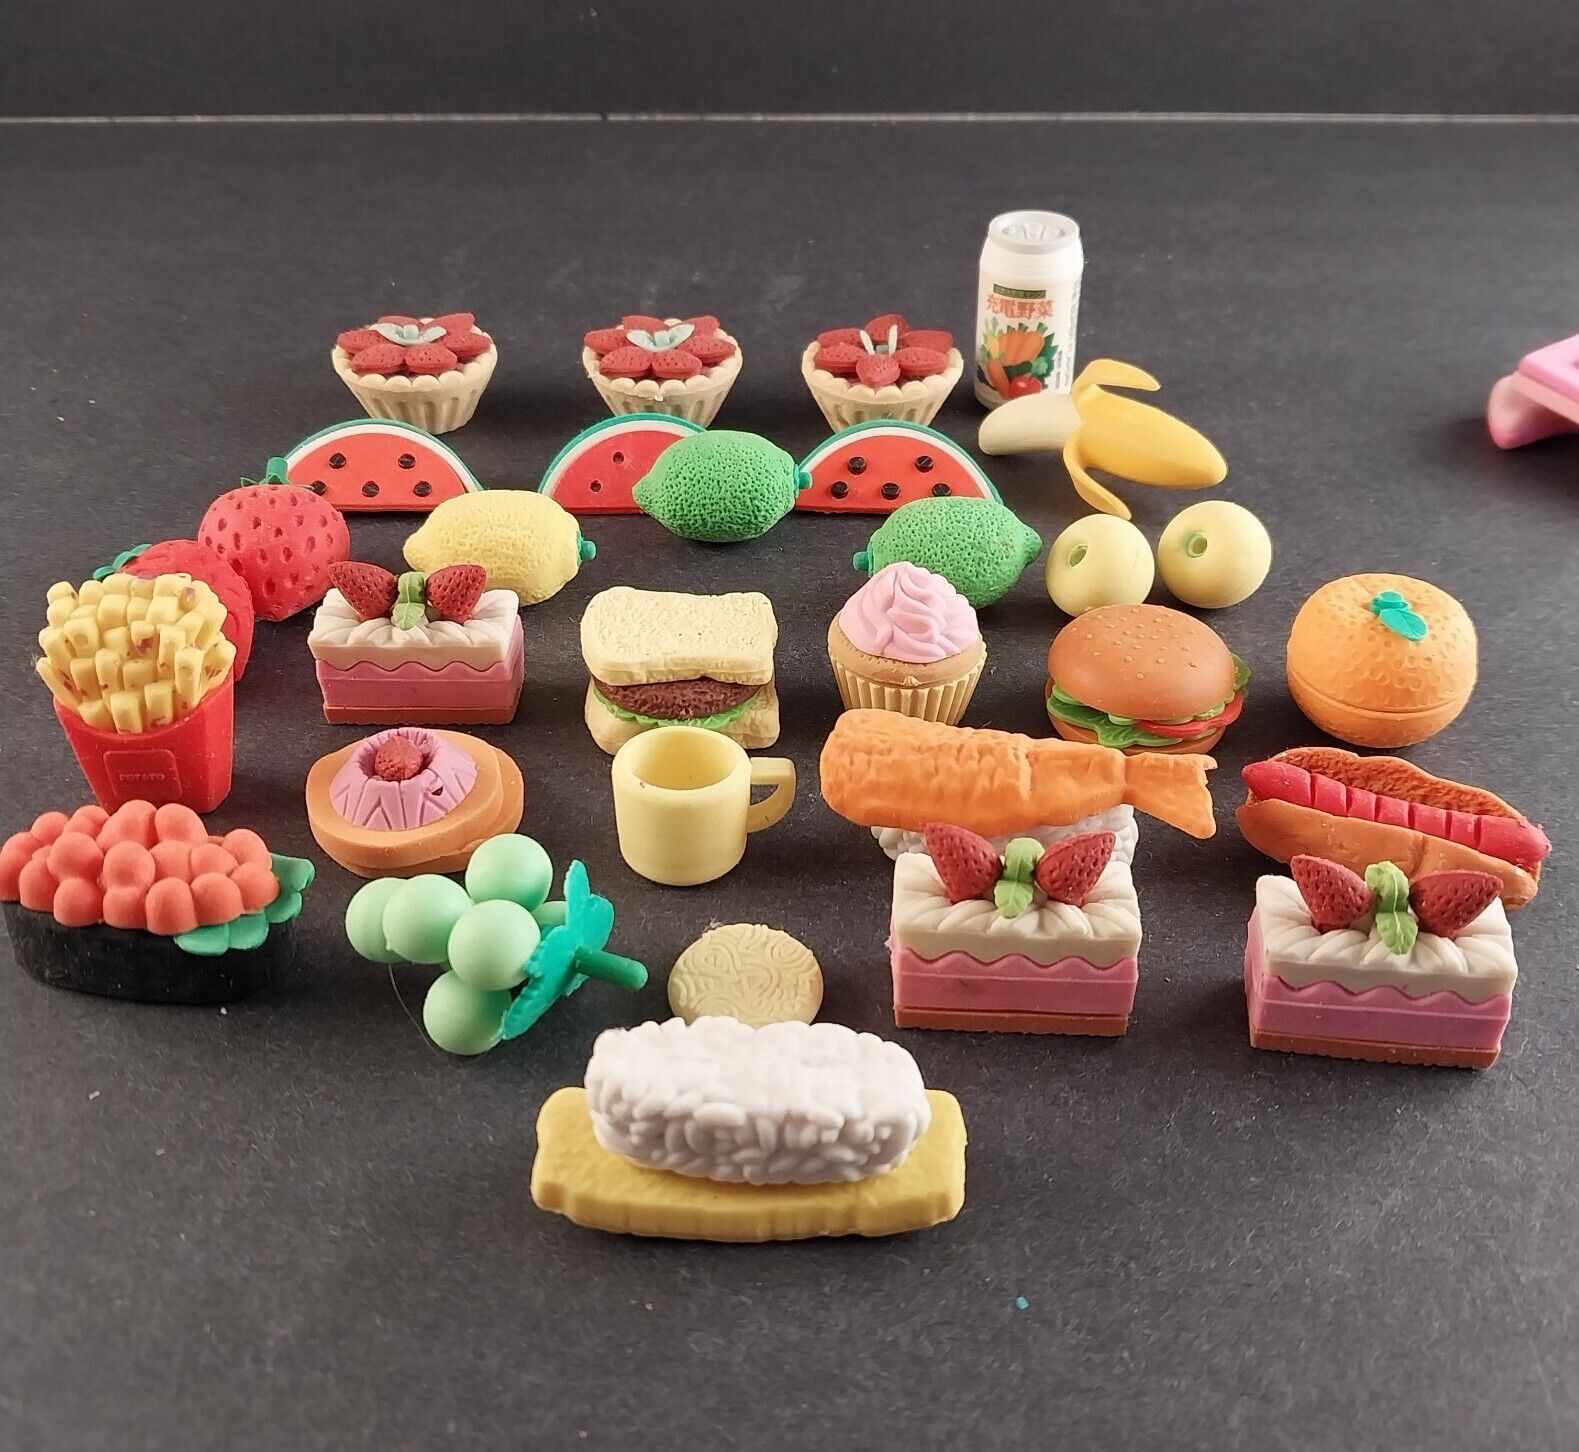 Eraser Food Lot of 31 Different Types of Food Hotdog Apple Sushi Pies